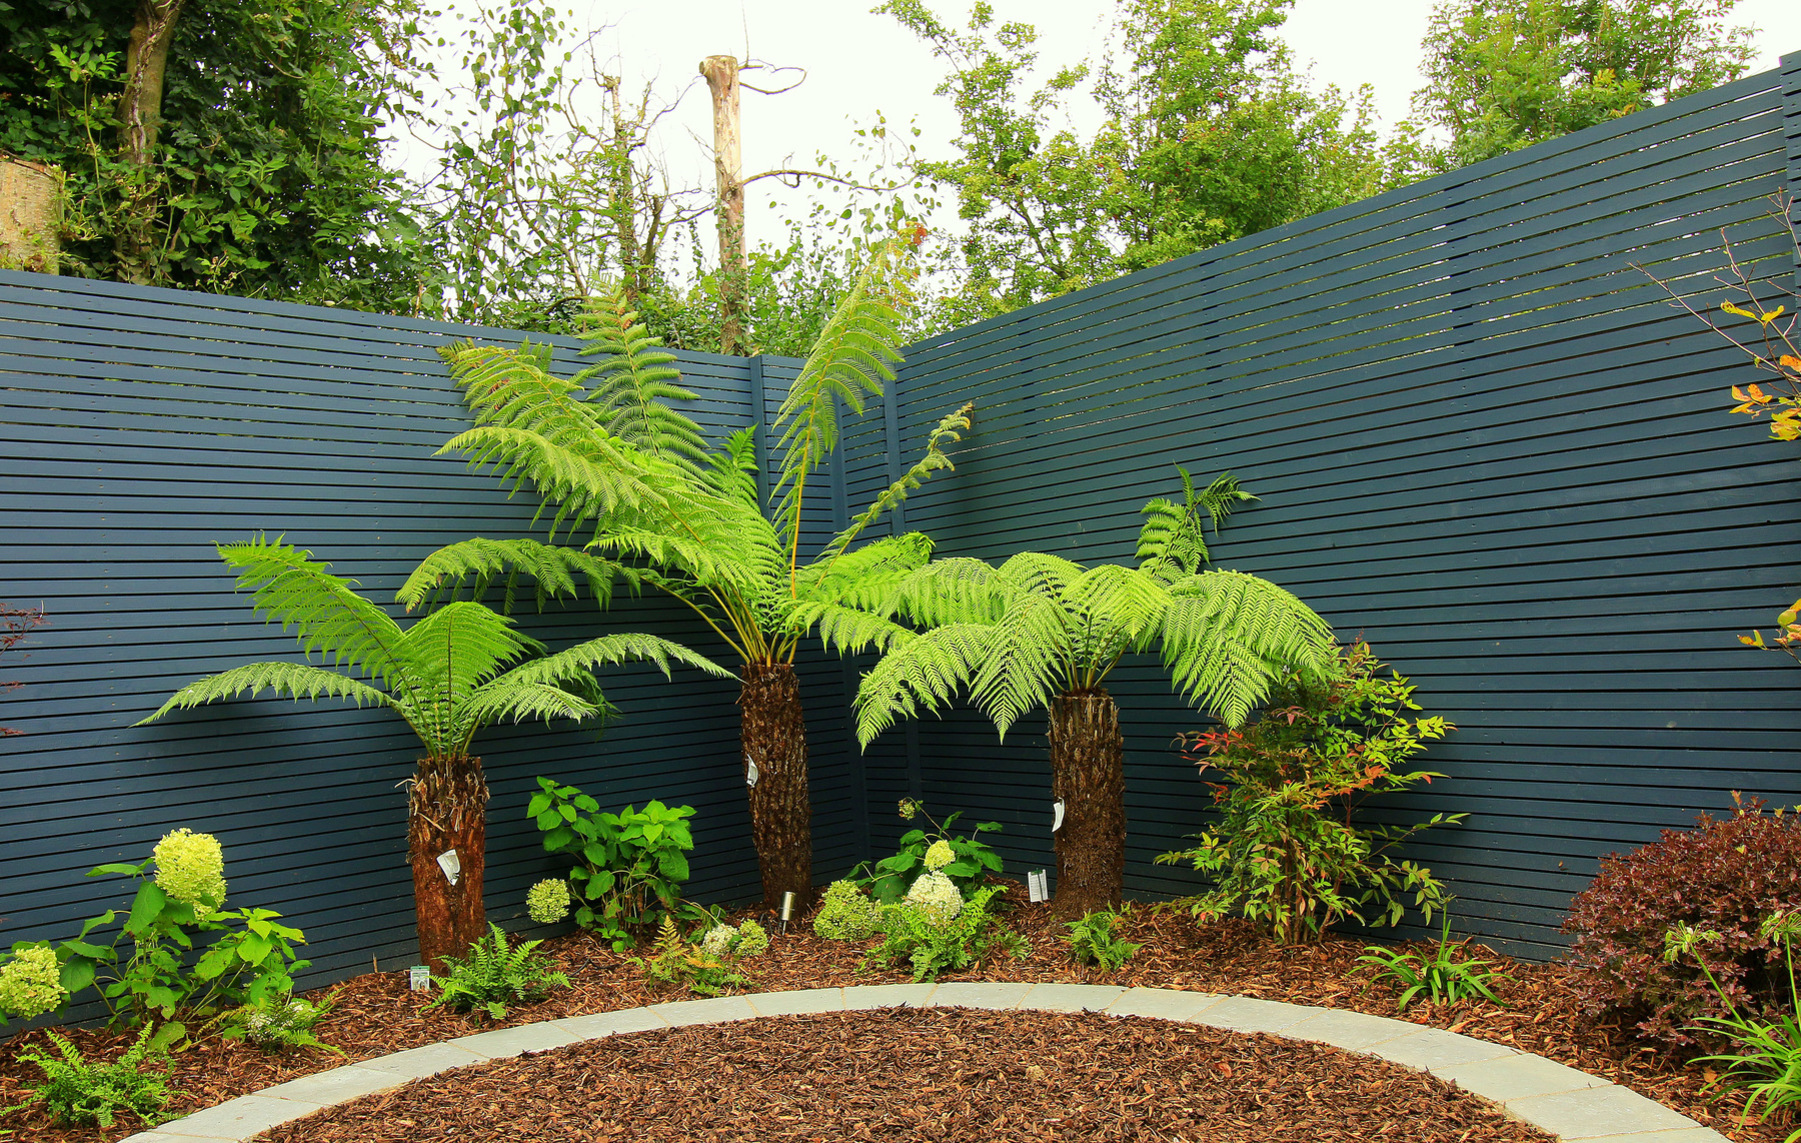 Family Garden Garden Design & Landscaping project in Rathcoole, Dublin 24 featuring limestone patios, custom made horizontal slatted fencing, tree ferns, olive trees, lush low maintenance planting.